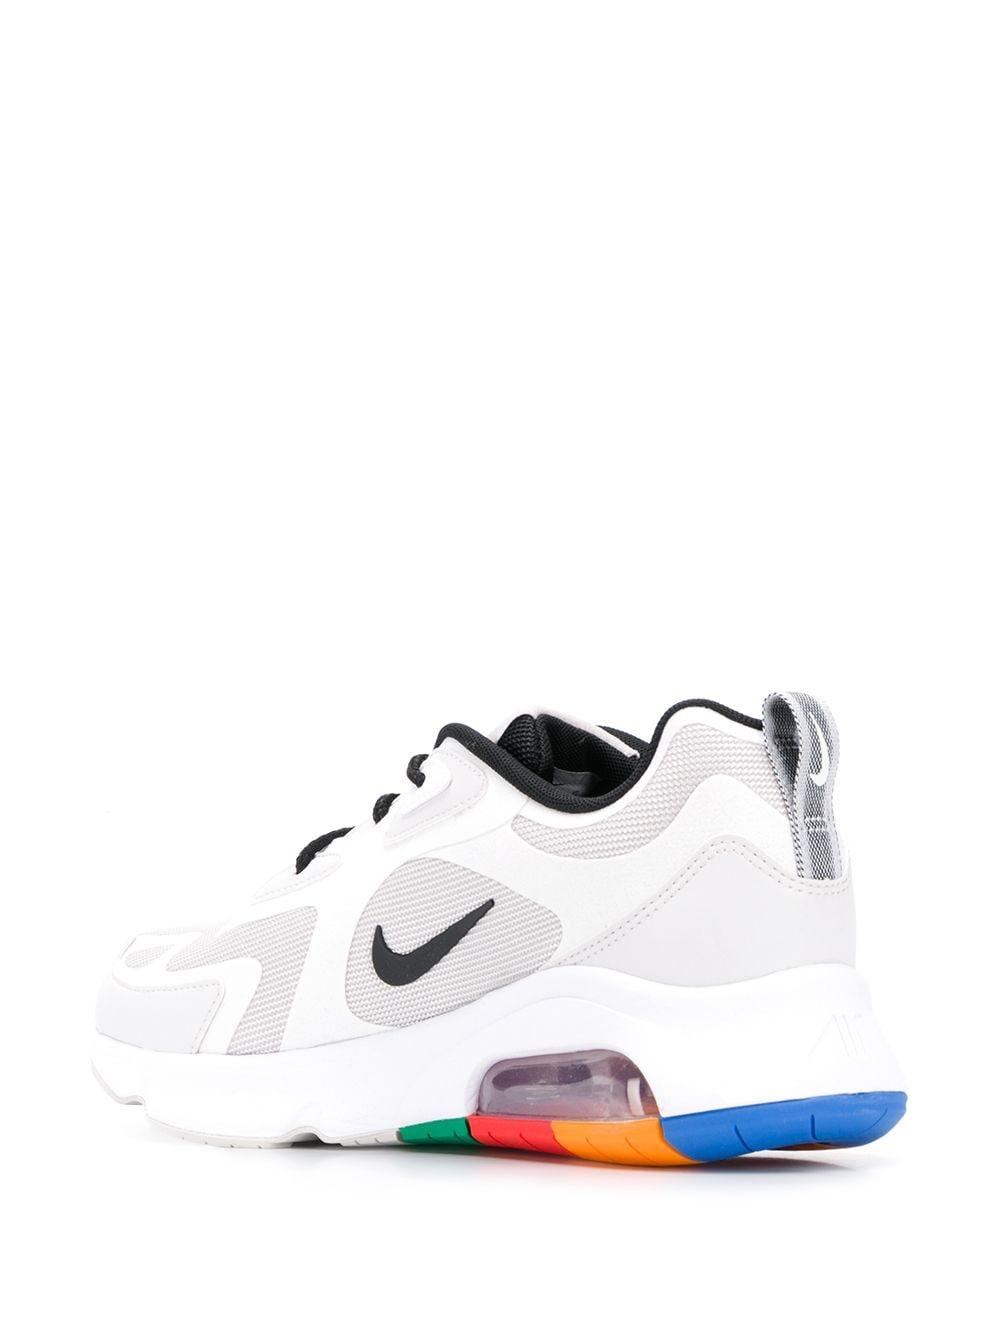 Nike Lace Air Max 200 (1996 World Stage) Sneakers in White for Men - Lyst